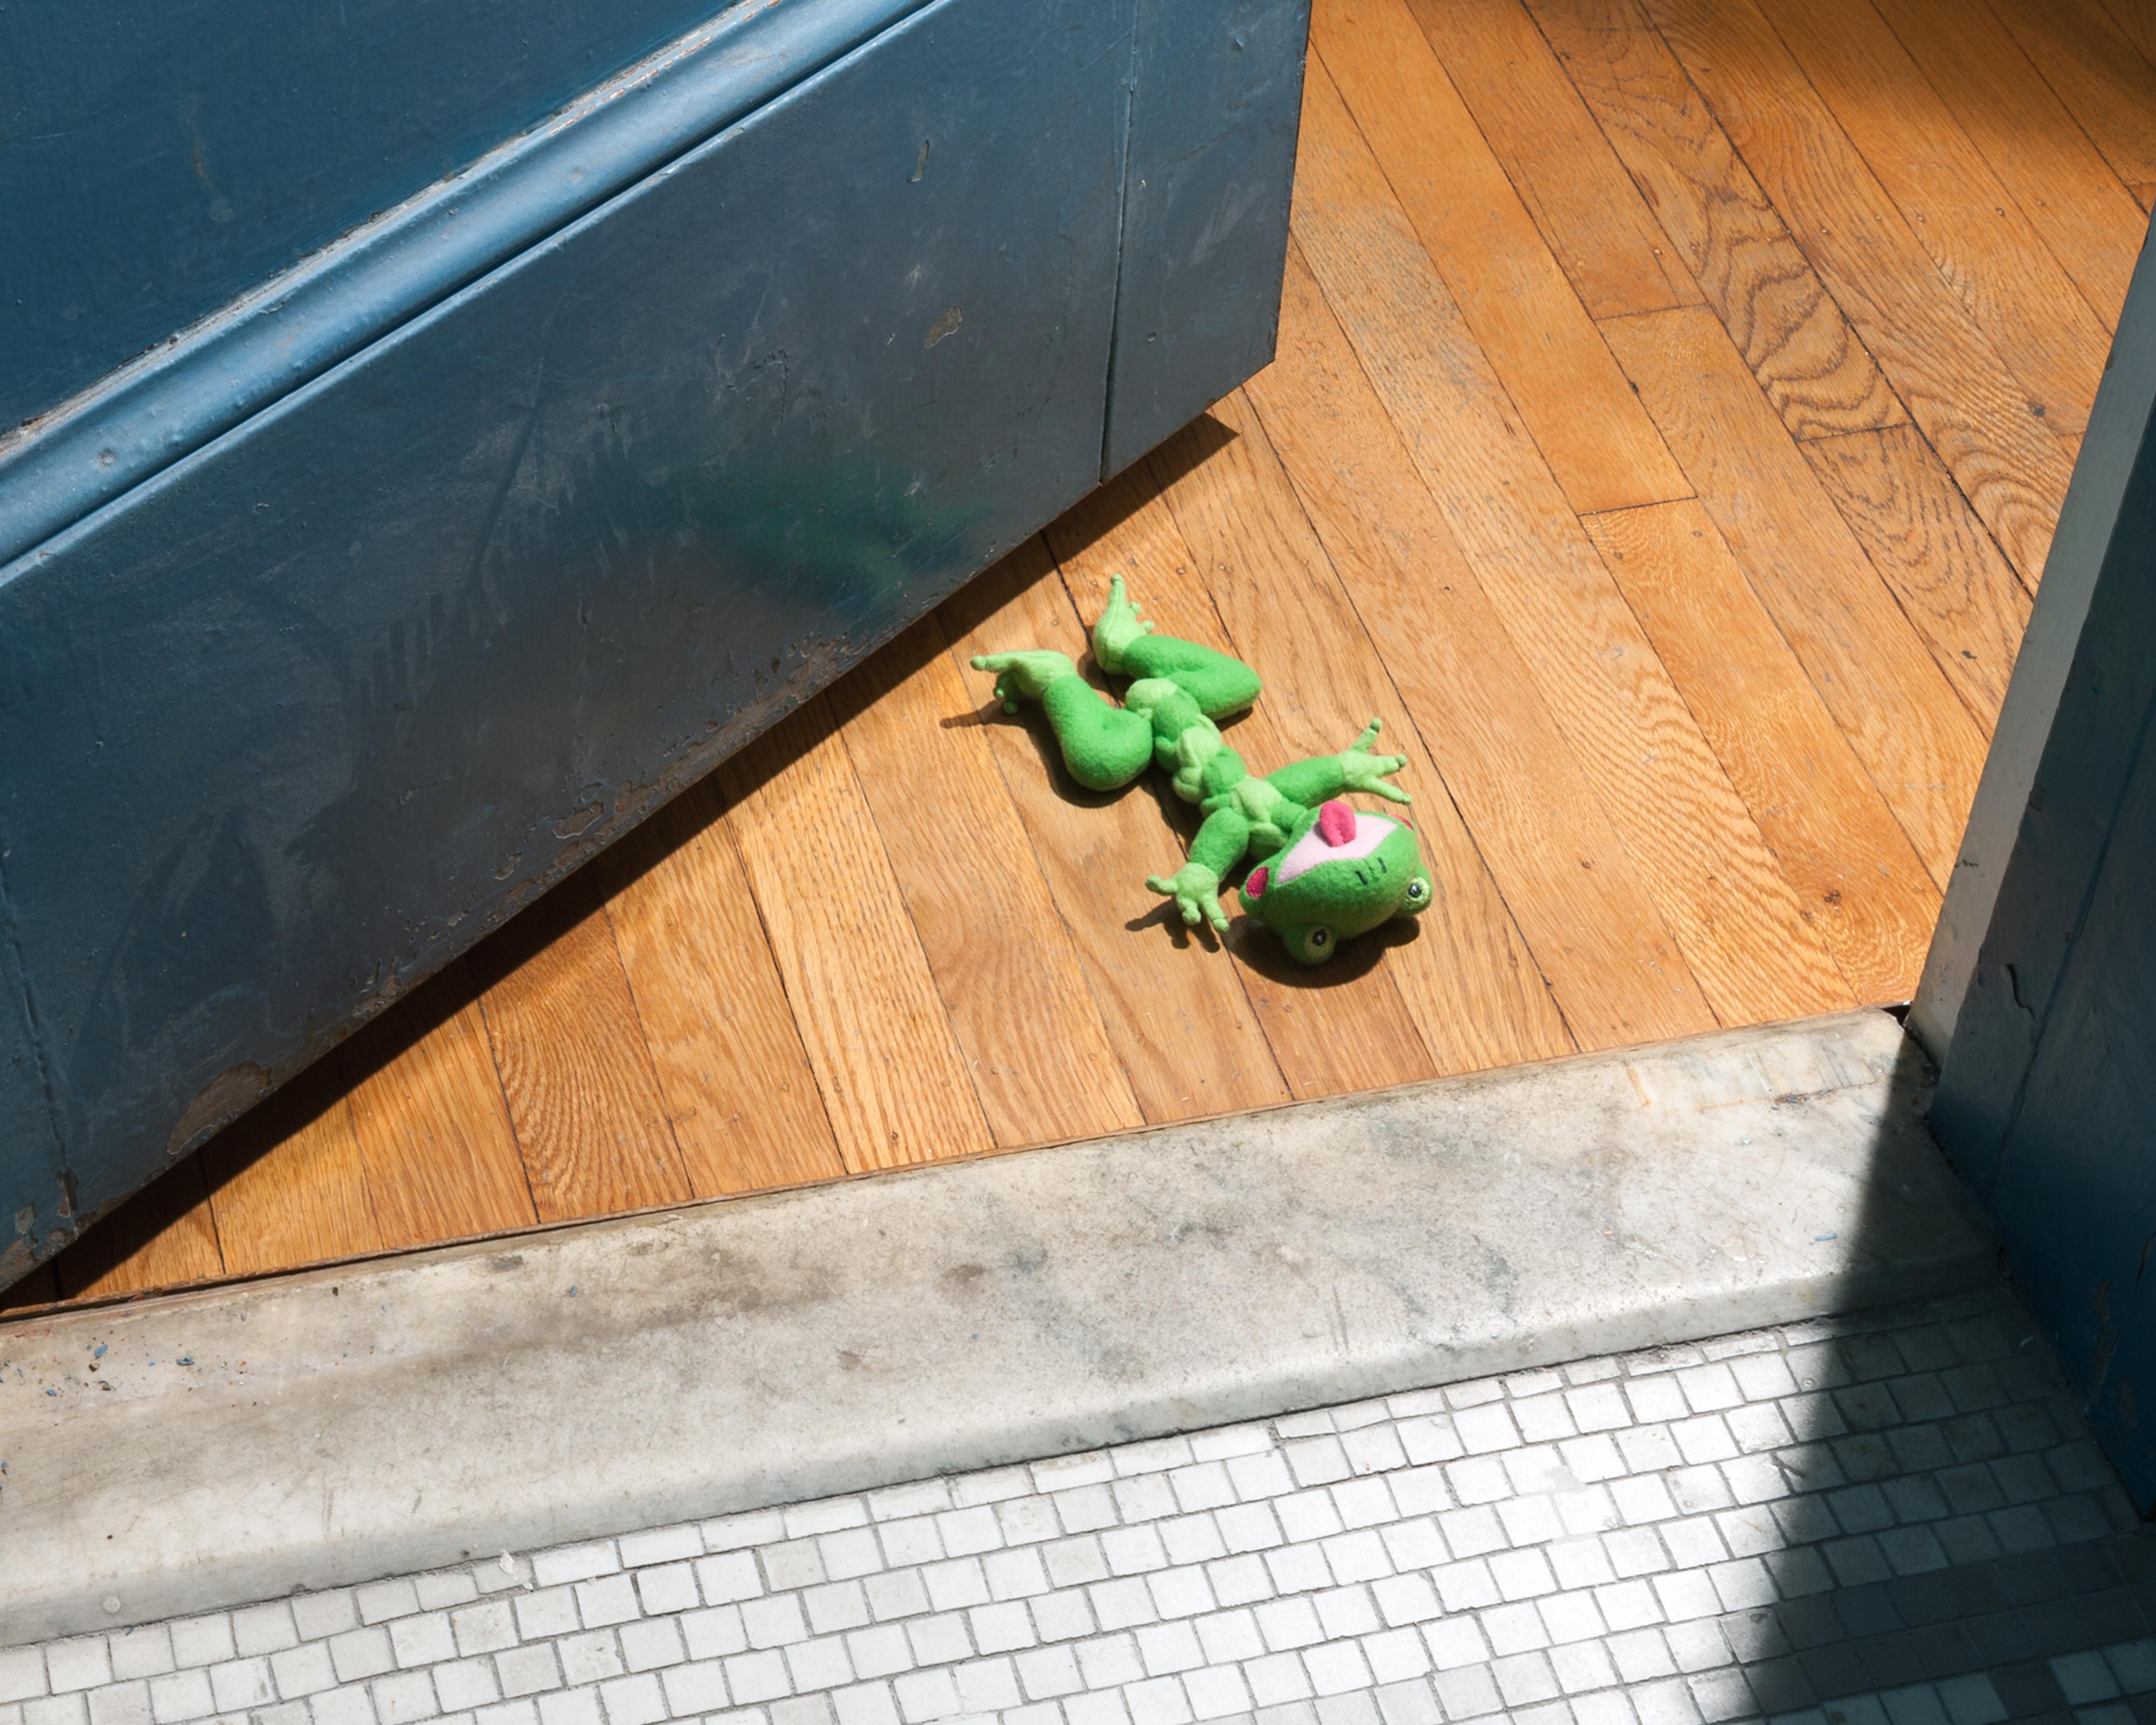 “Morbidity & Mortality: Frog” Humorous Photograph of a Dog Toy in Crime Scene - Print by Jeanette May